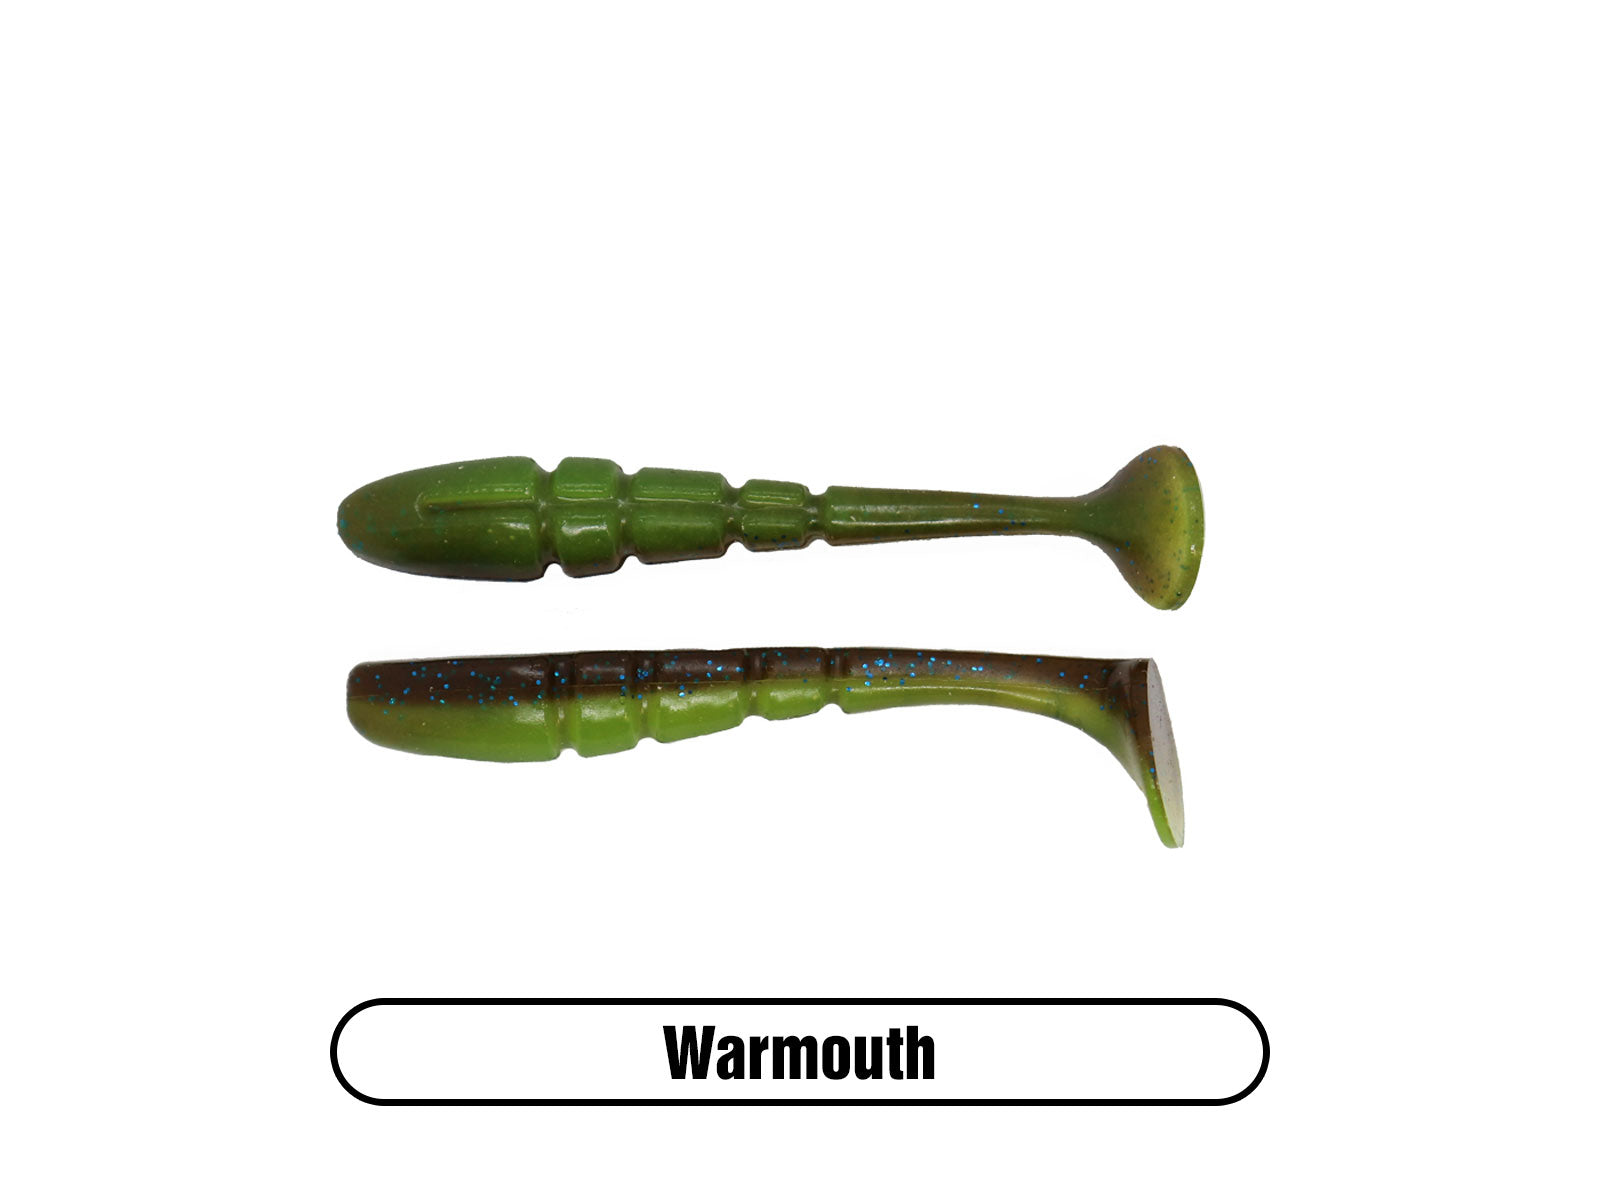 Swimbait 3.5 Inch Paddle Tail (8 Pack)